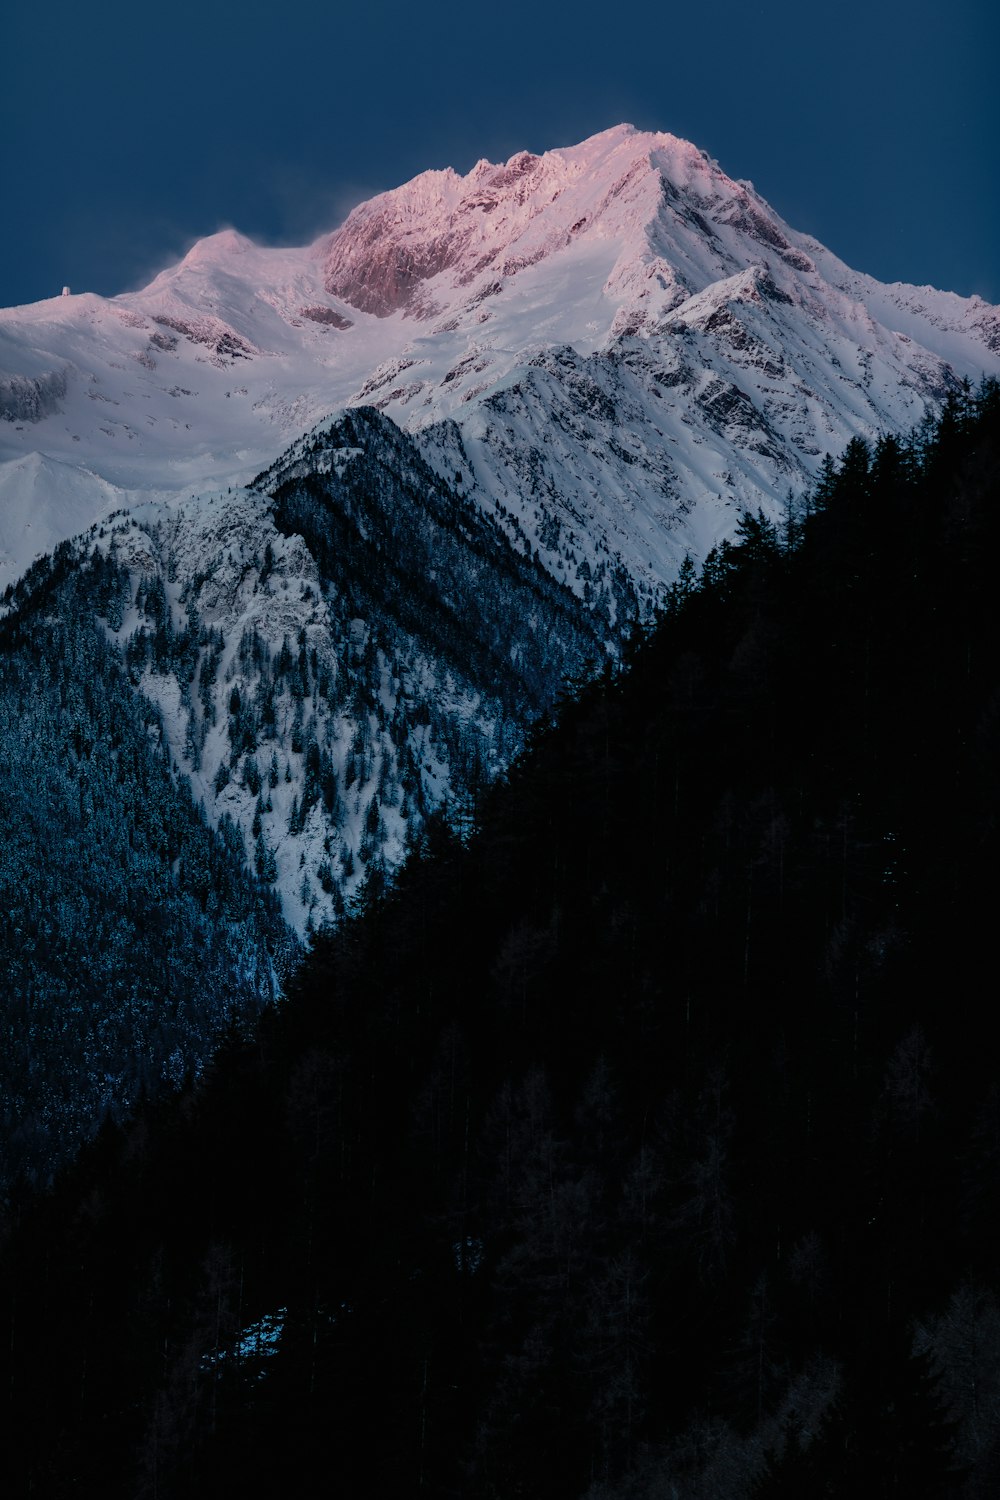 a view of a snow covered mountain